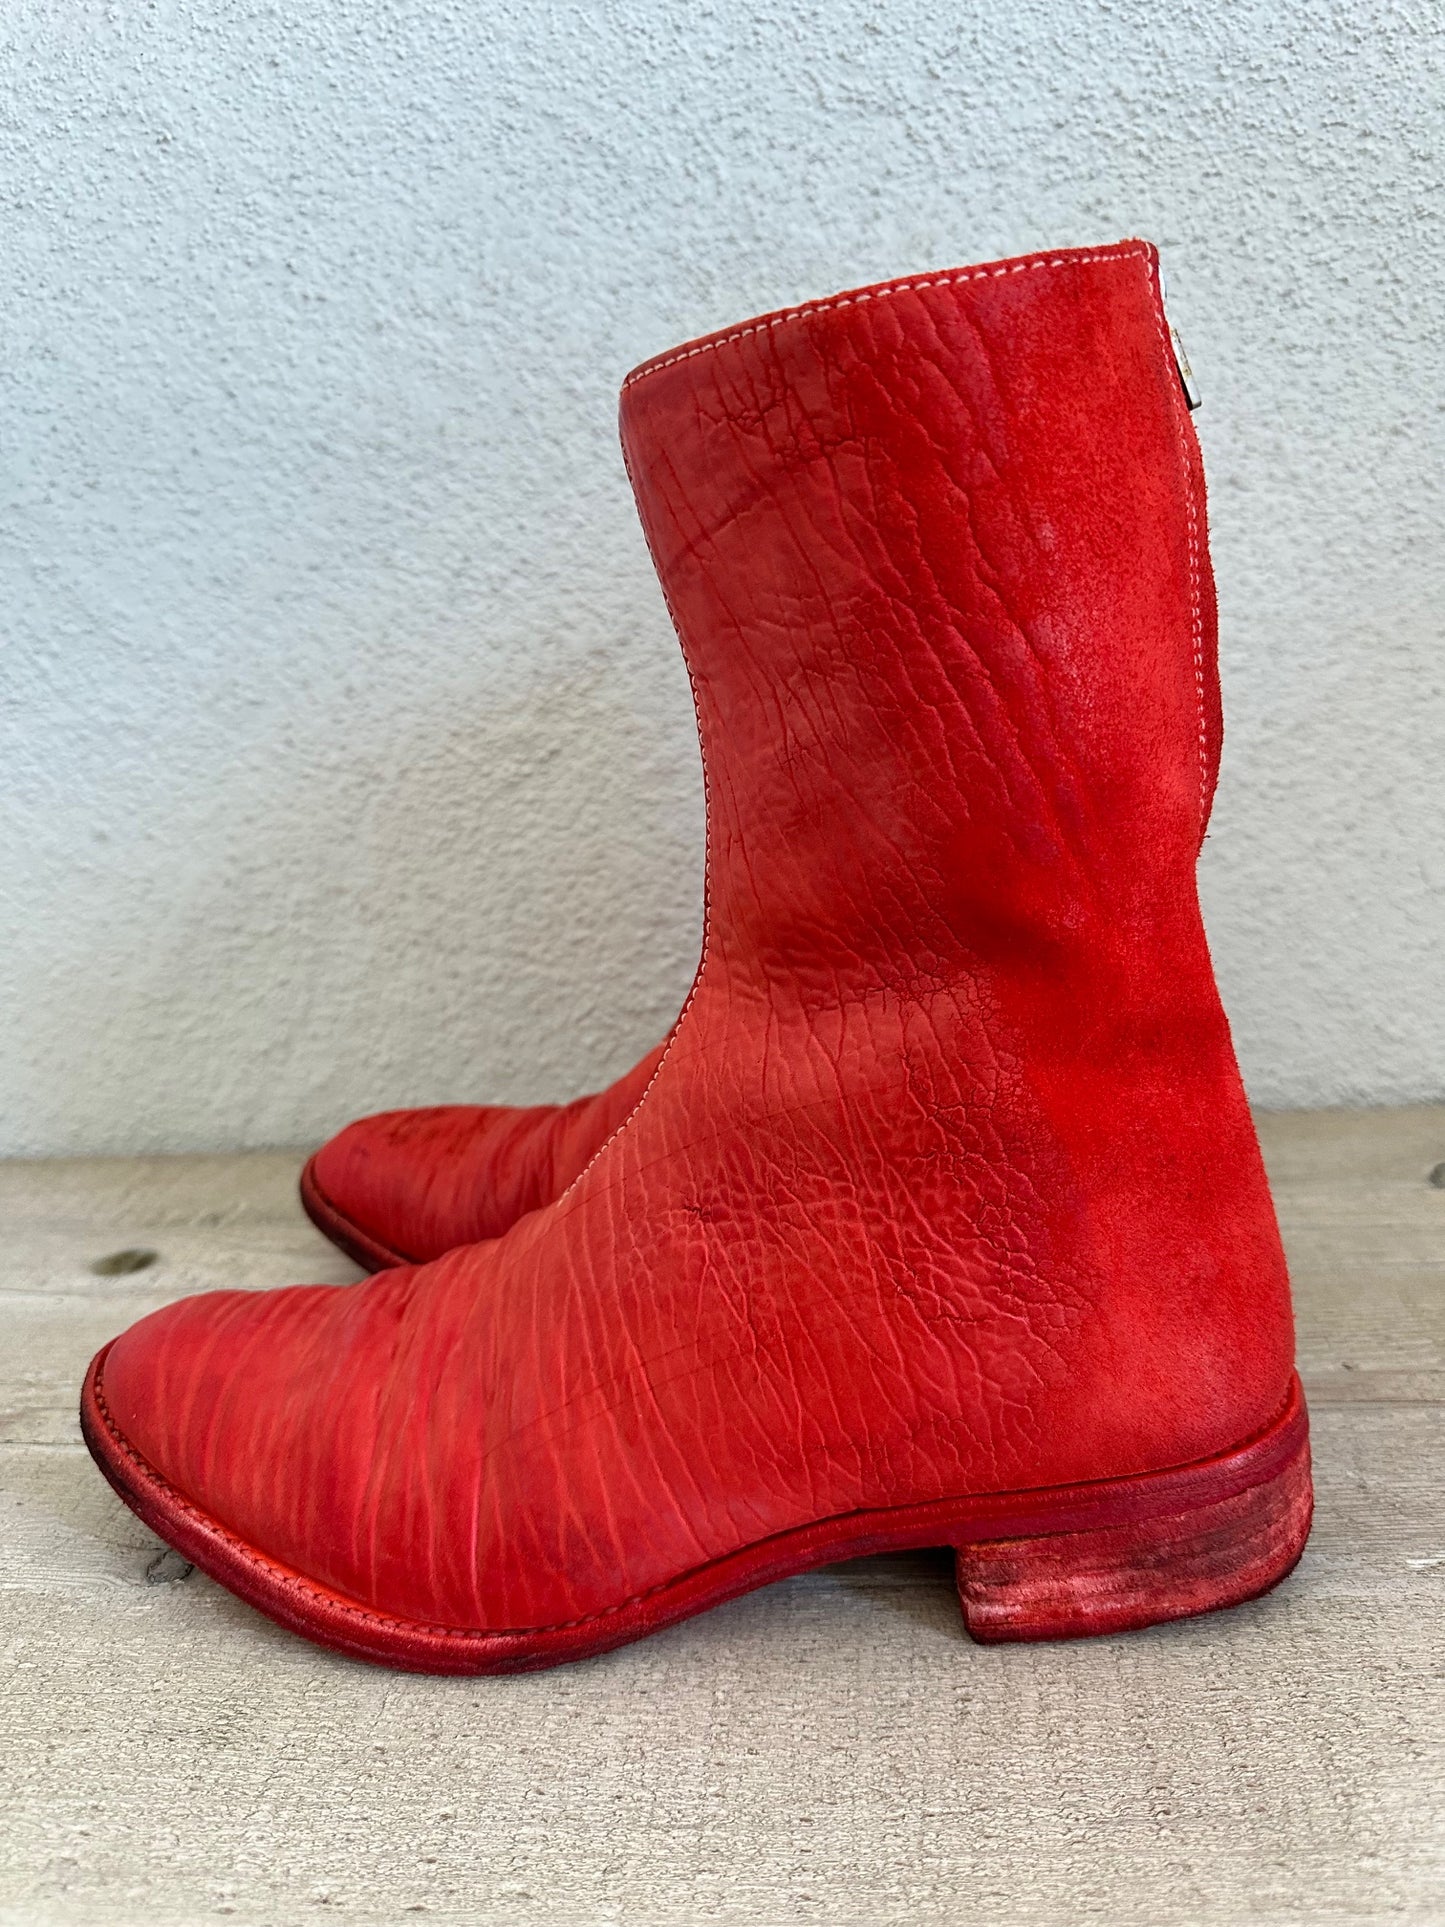 Red Object Dyed Culatta Horse Diagonal Zipper Boots AM2601L CUBS-PTC13 by Carol Christian Poell